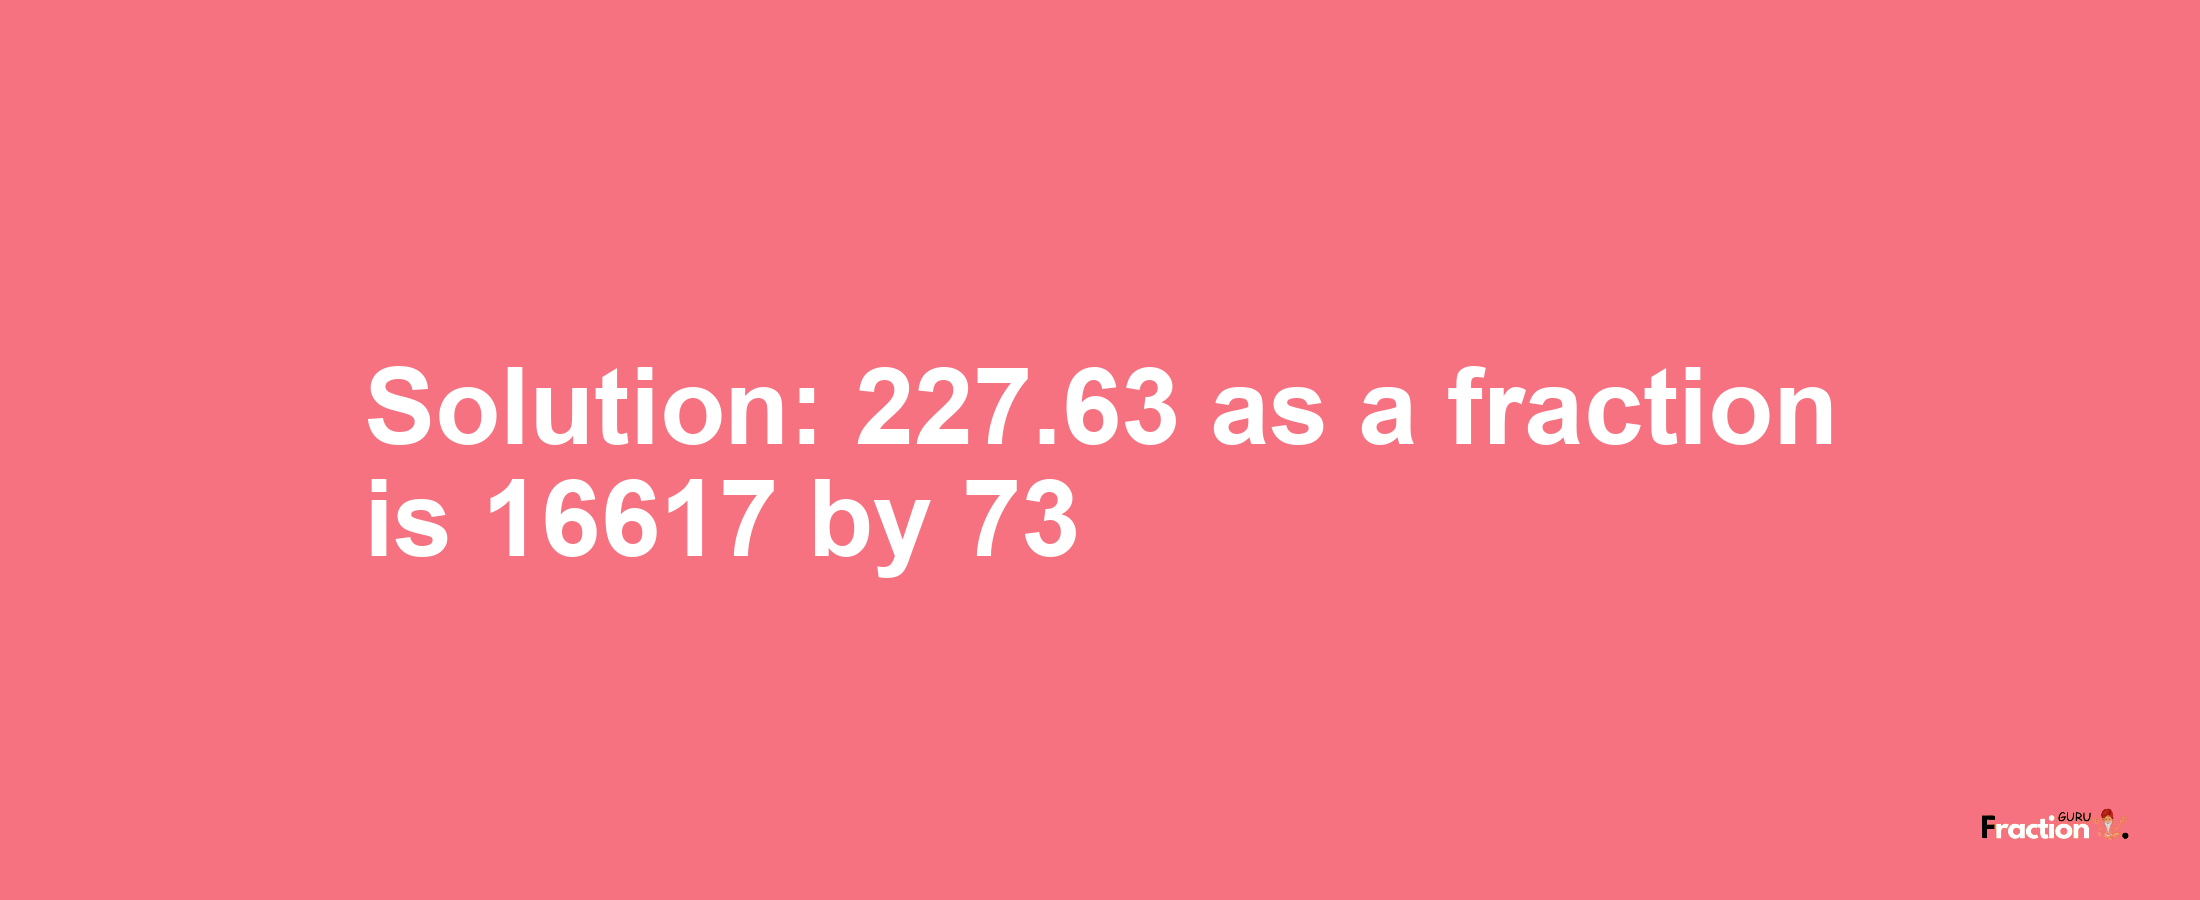 Solution:227.63 as a fraction is 16617/73